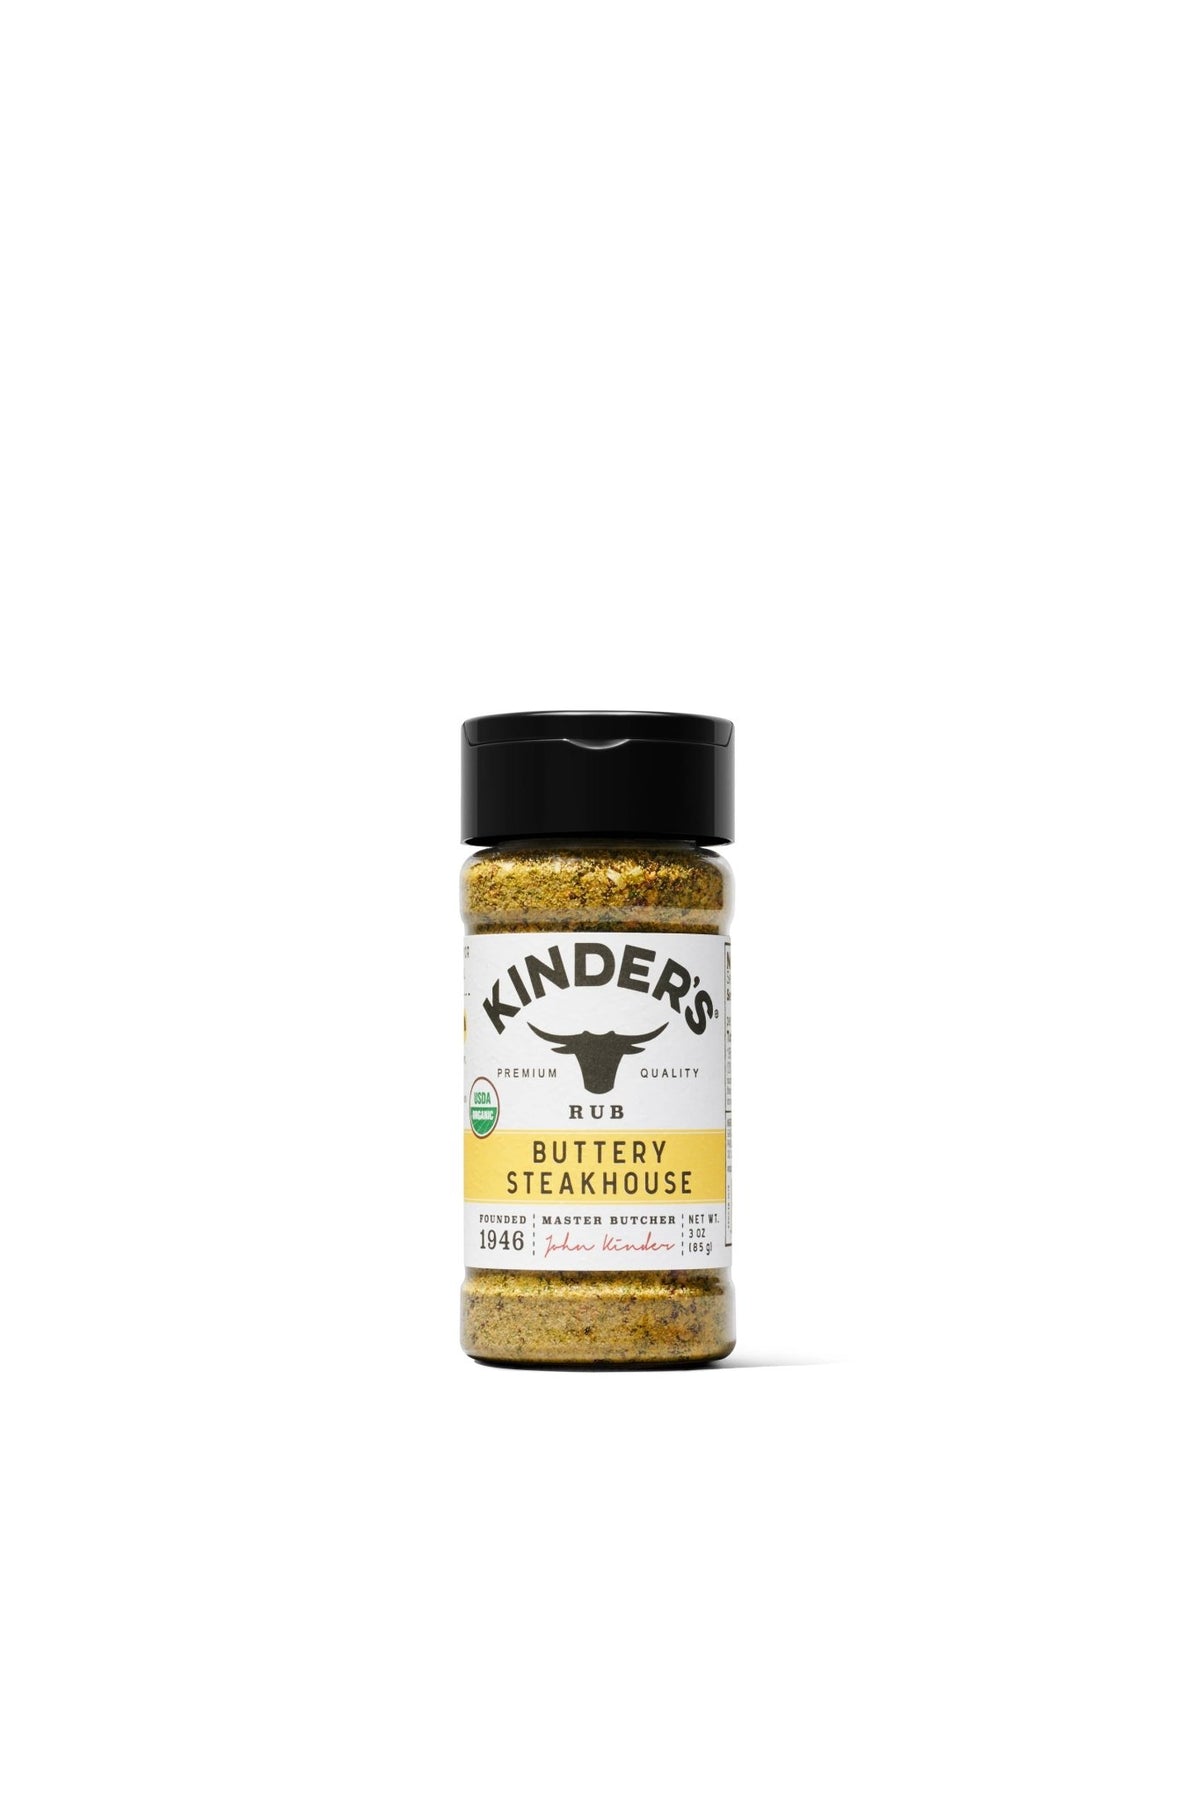 Kinder's Sauces & Seasonings - Organic Buttery Steakhouse 3oz - Pacific Flyway Supplies